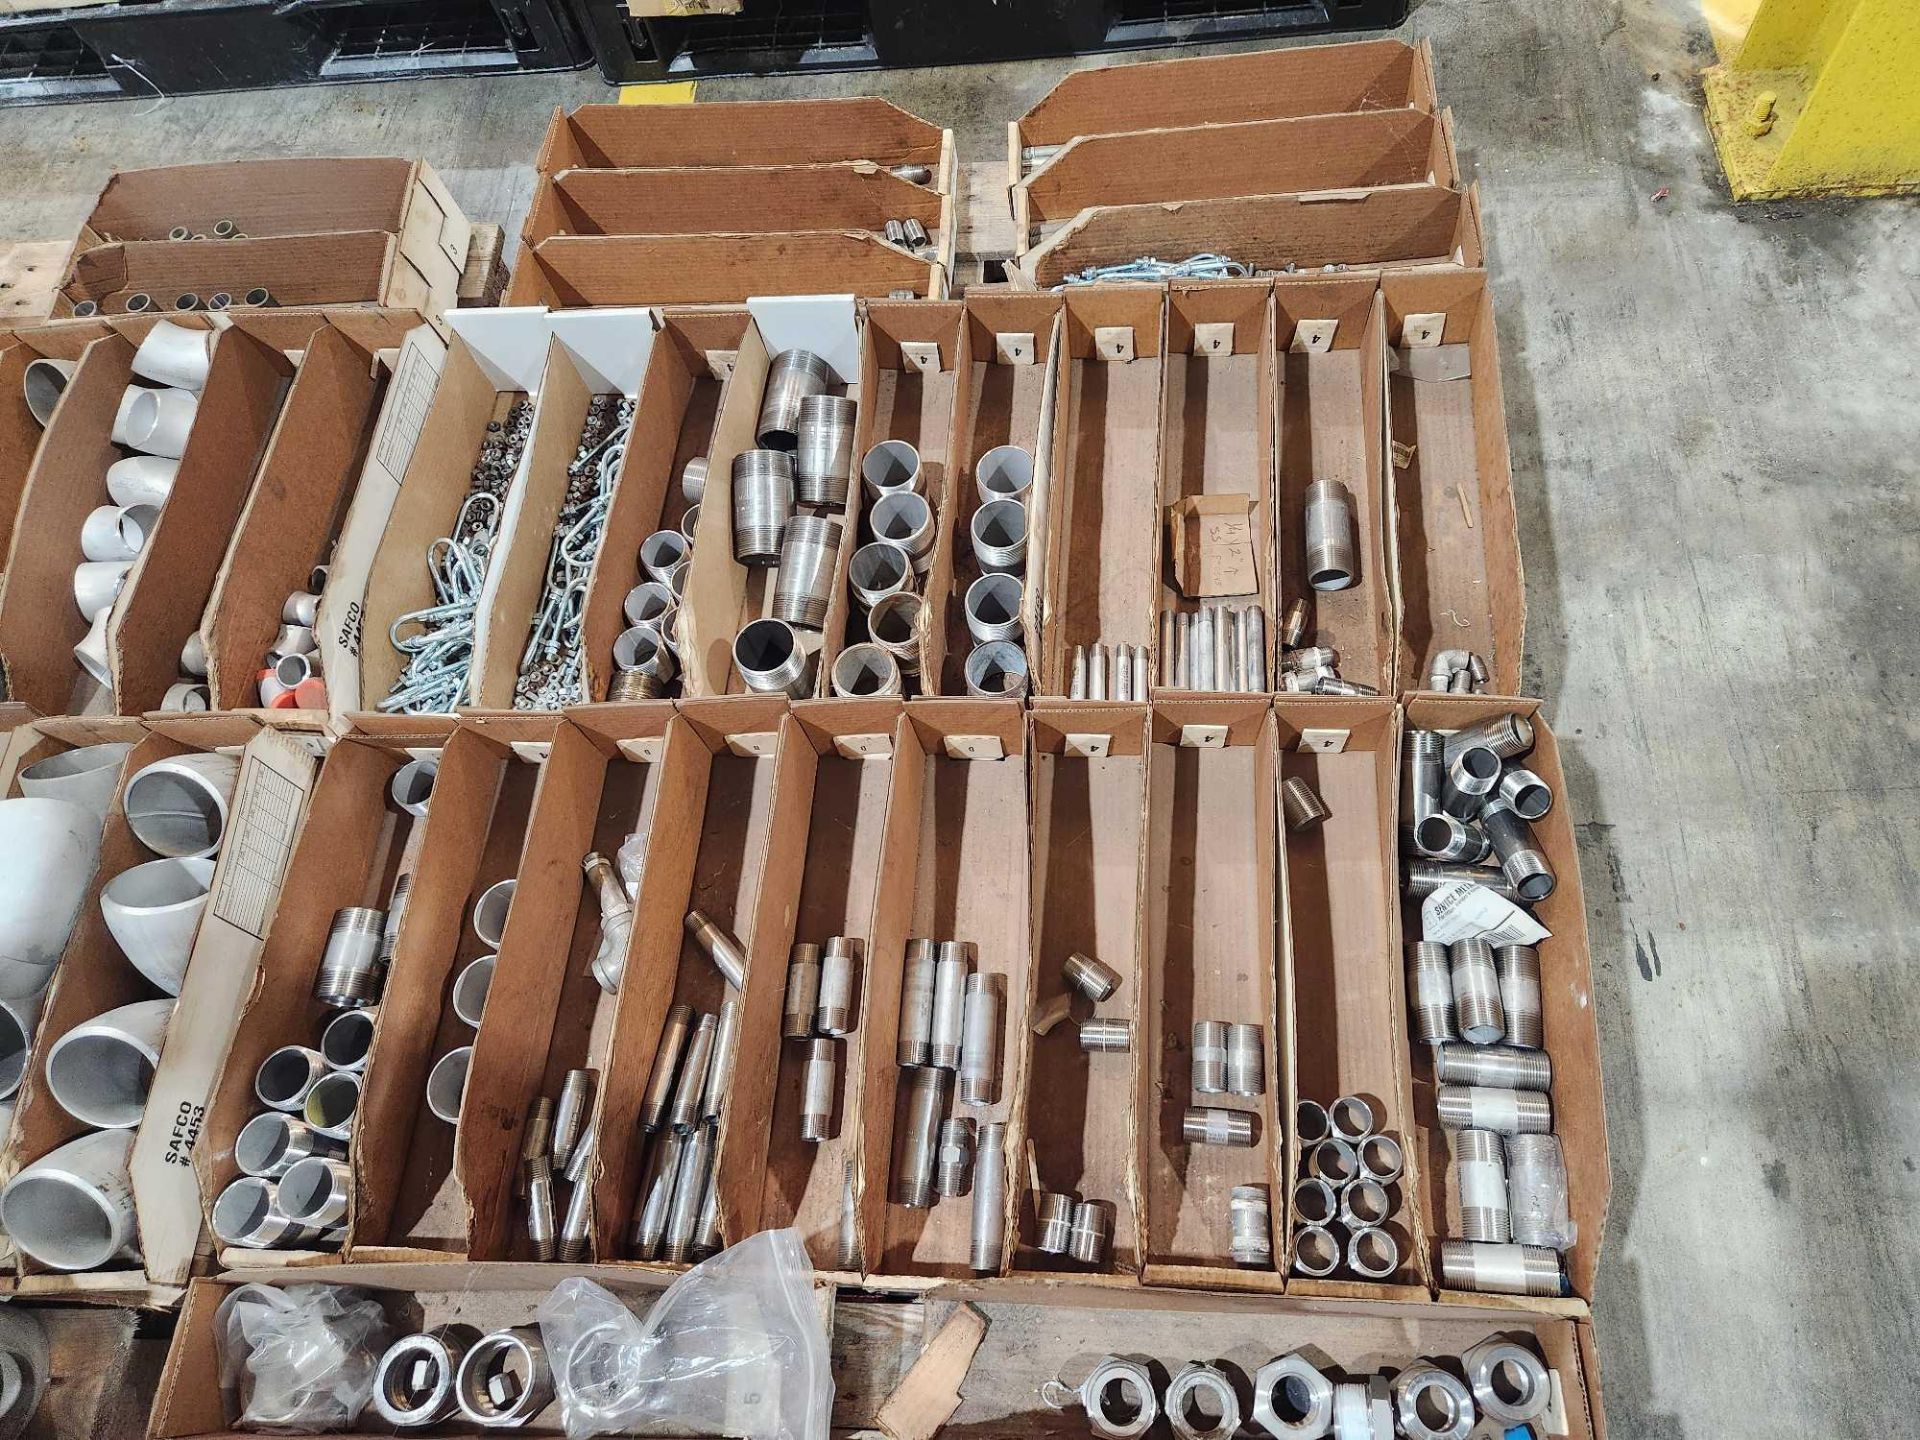 Lot asst stainless steel fittings, connectors, adapters, etc. (SORTED BY SIZE IN CARDBOARD BOXES), - Image 8 of 8